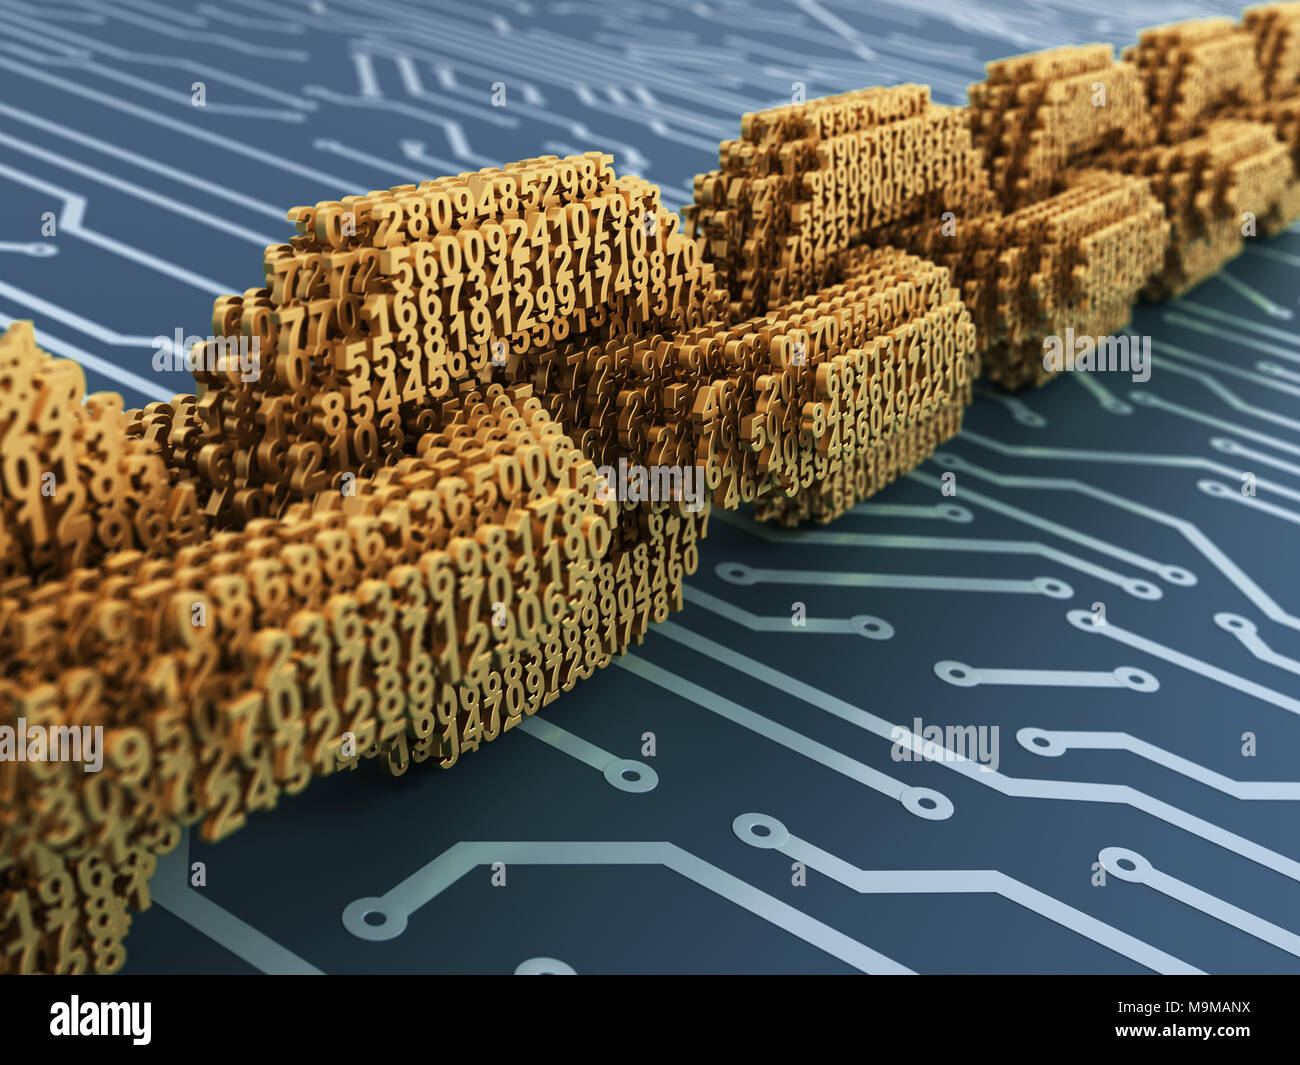 Concept Of Blockchain. Gold Digital Chain Of Interconnected 3D Numbers On Blue Printed Circuit Board. 3D Illustration. Stock Photo